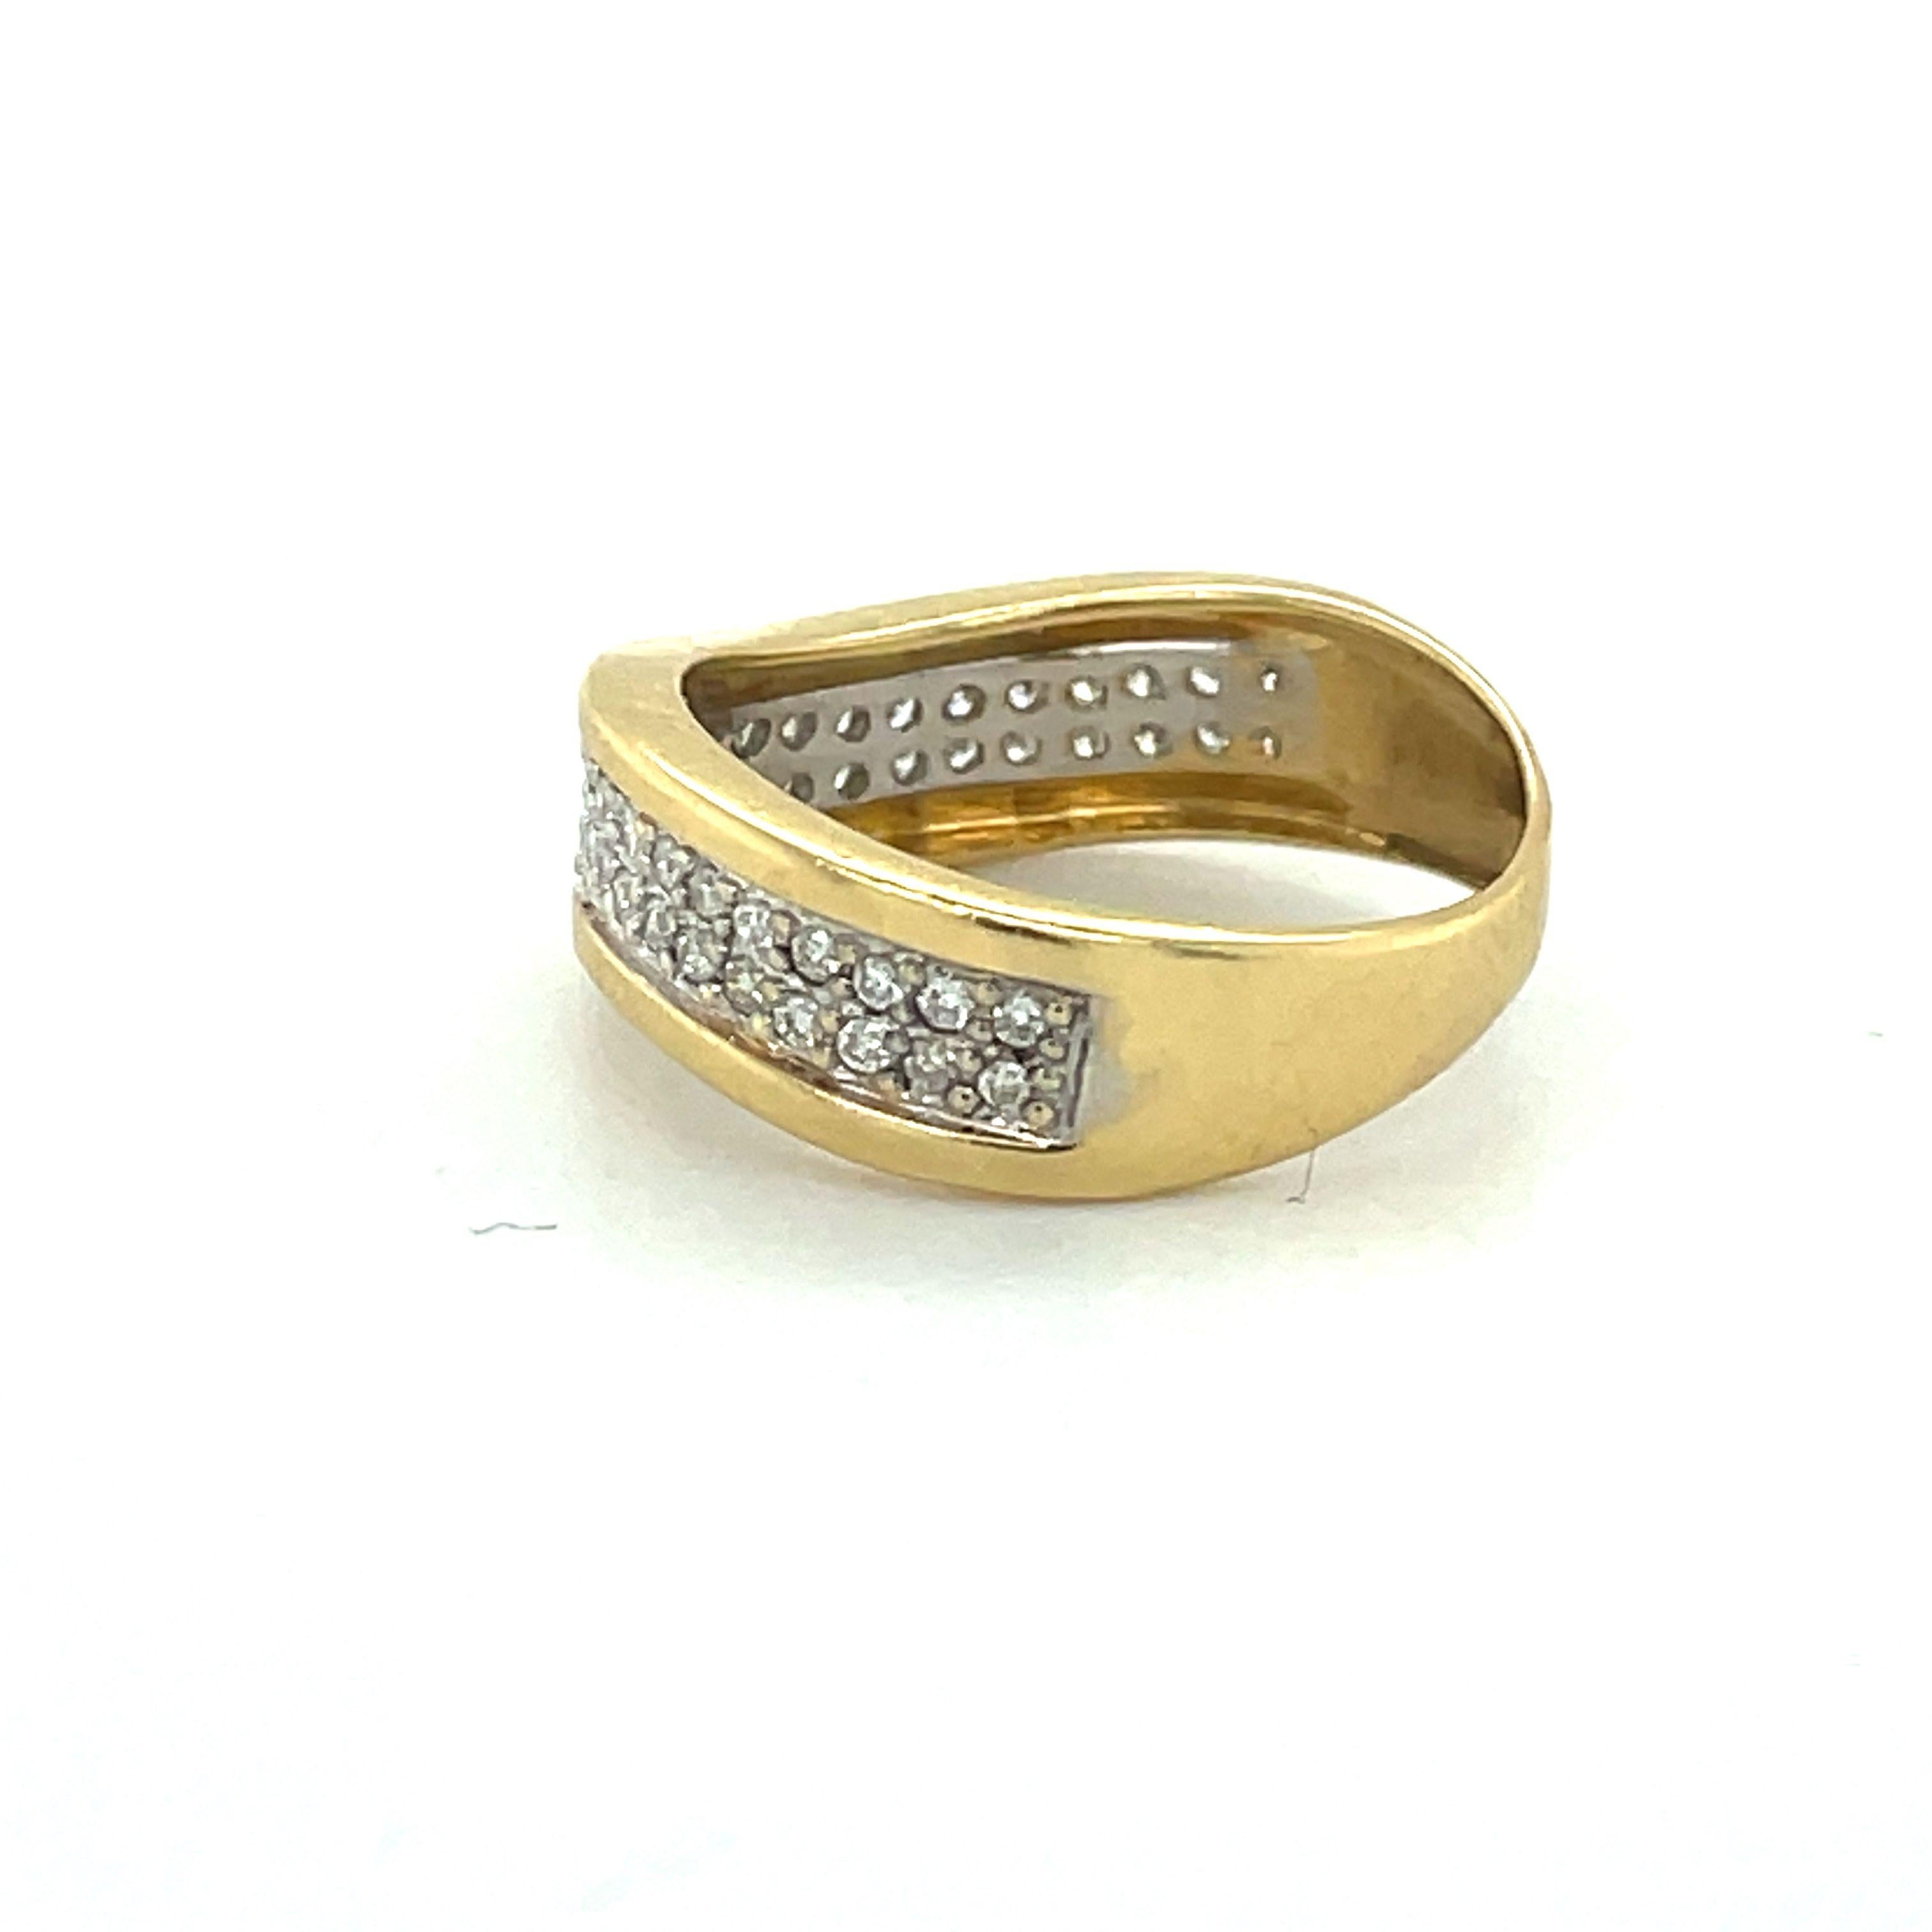 Vintage Gold Wave Band, 0.25CT Diamond, 18k Yellow Gold ring, weddding band ring For Sale 1